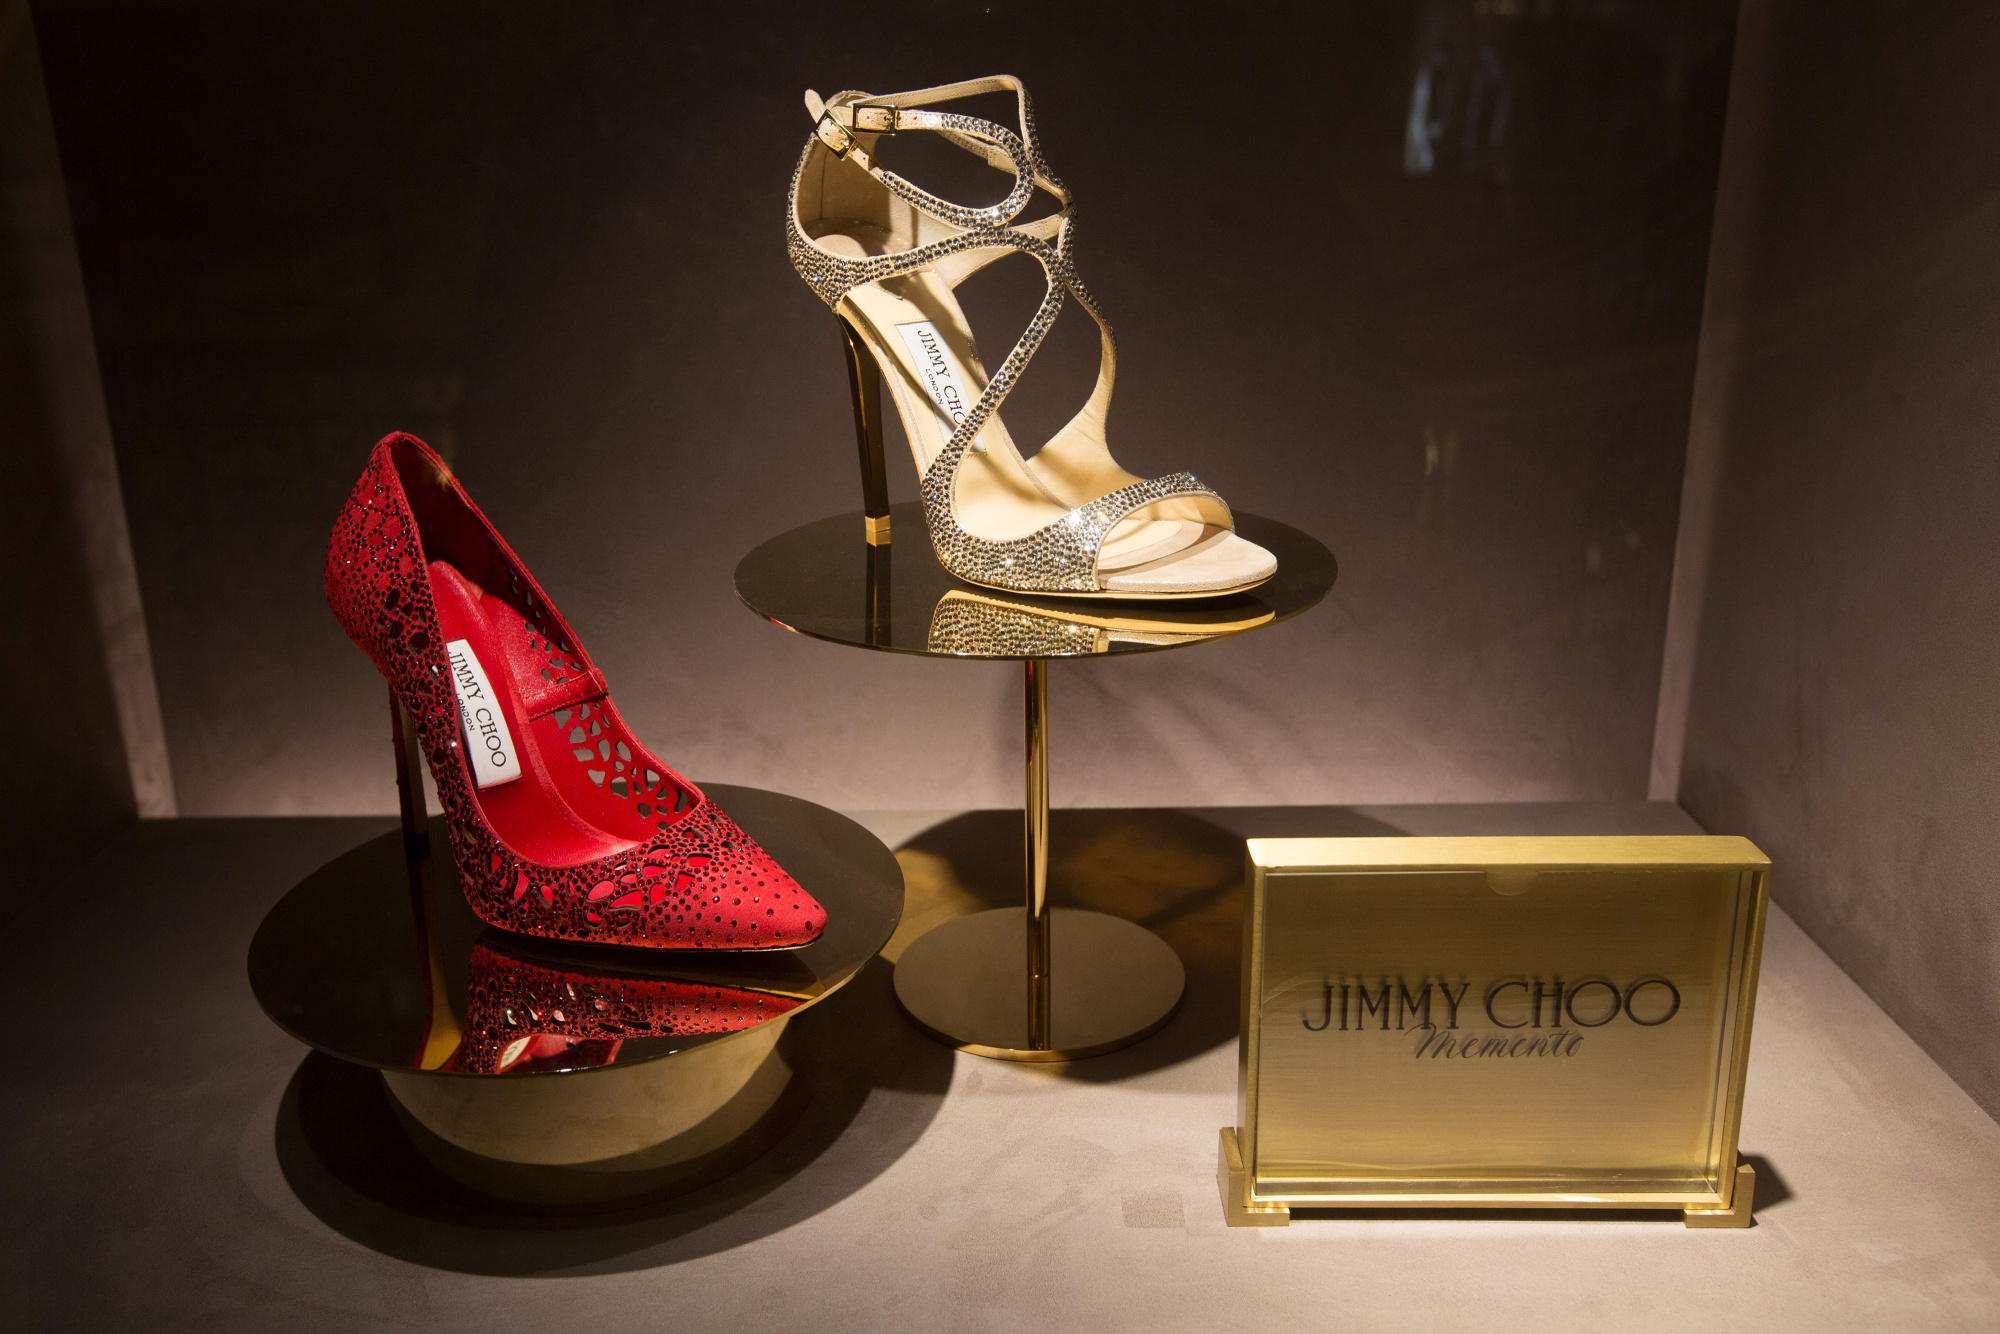 Jimmy Choo's Tips For Success  What are Jimmy Choo's tips for